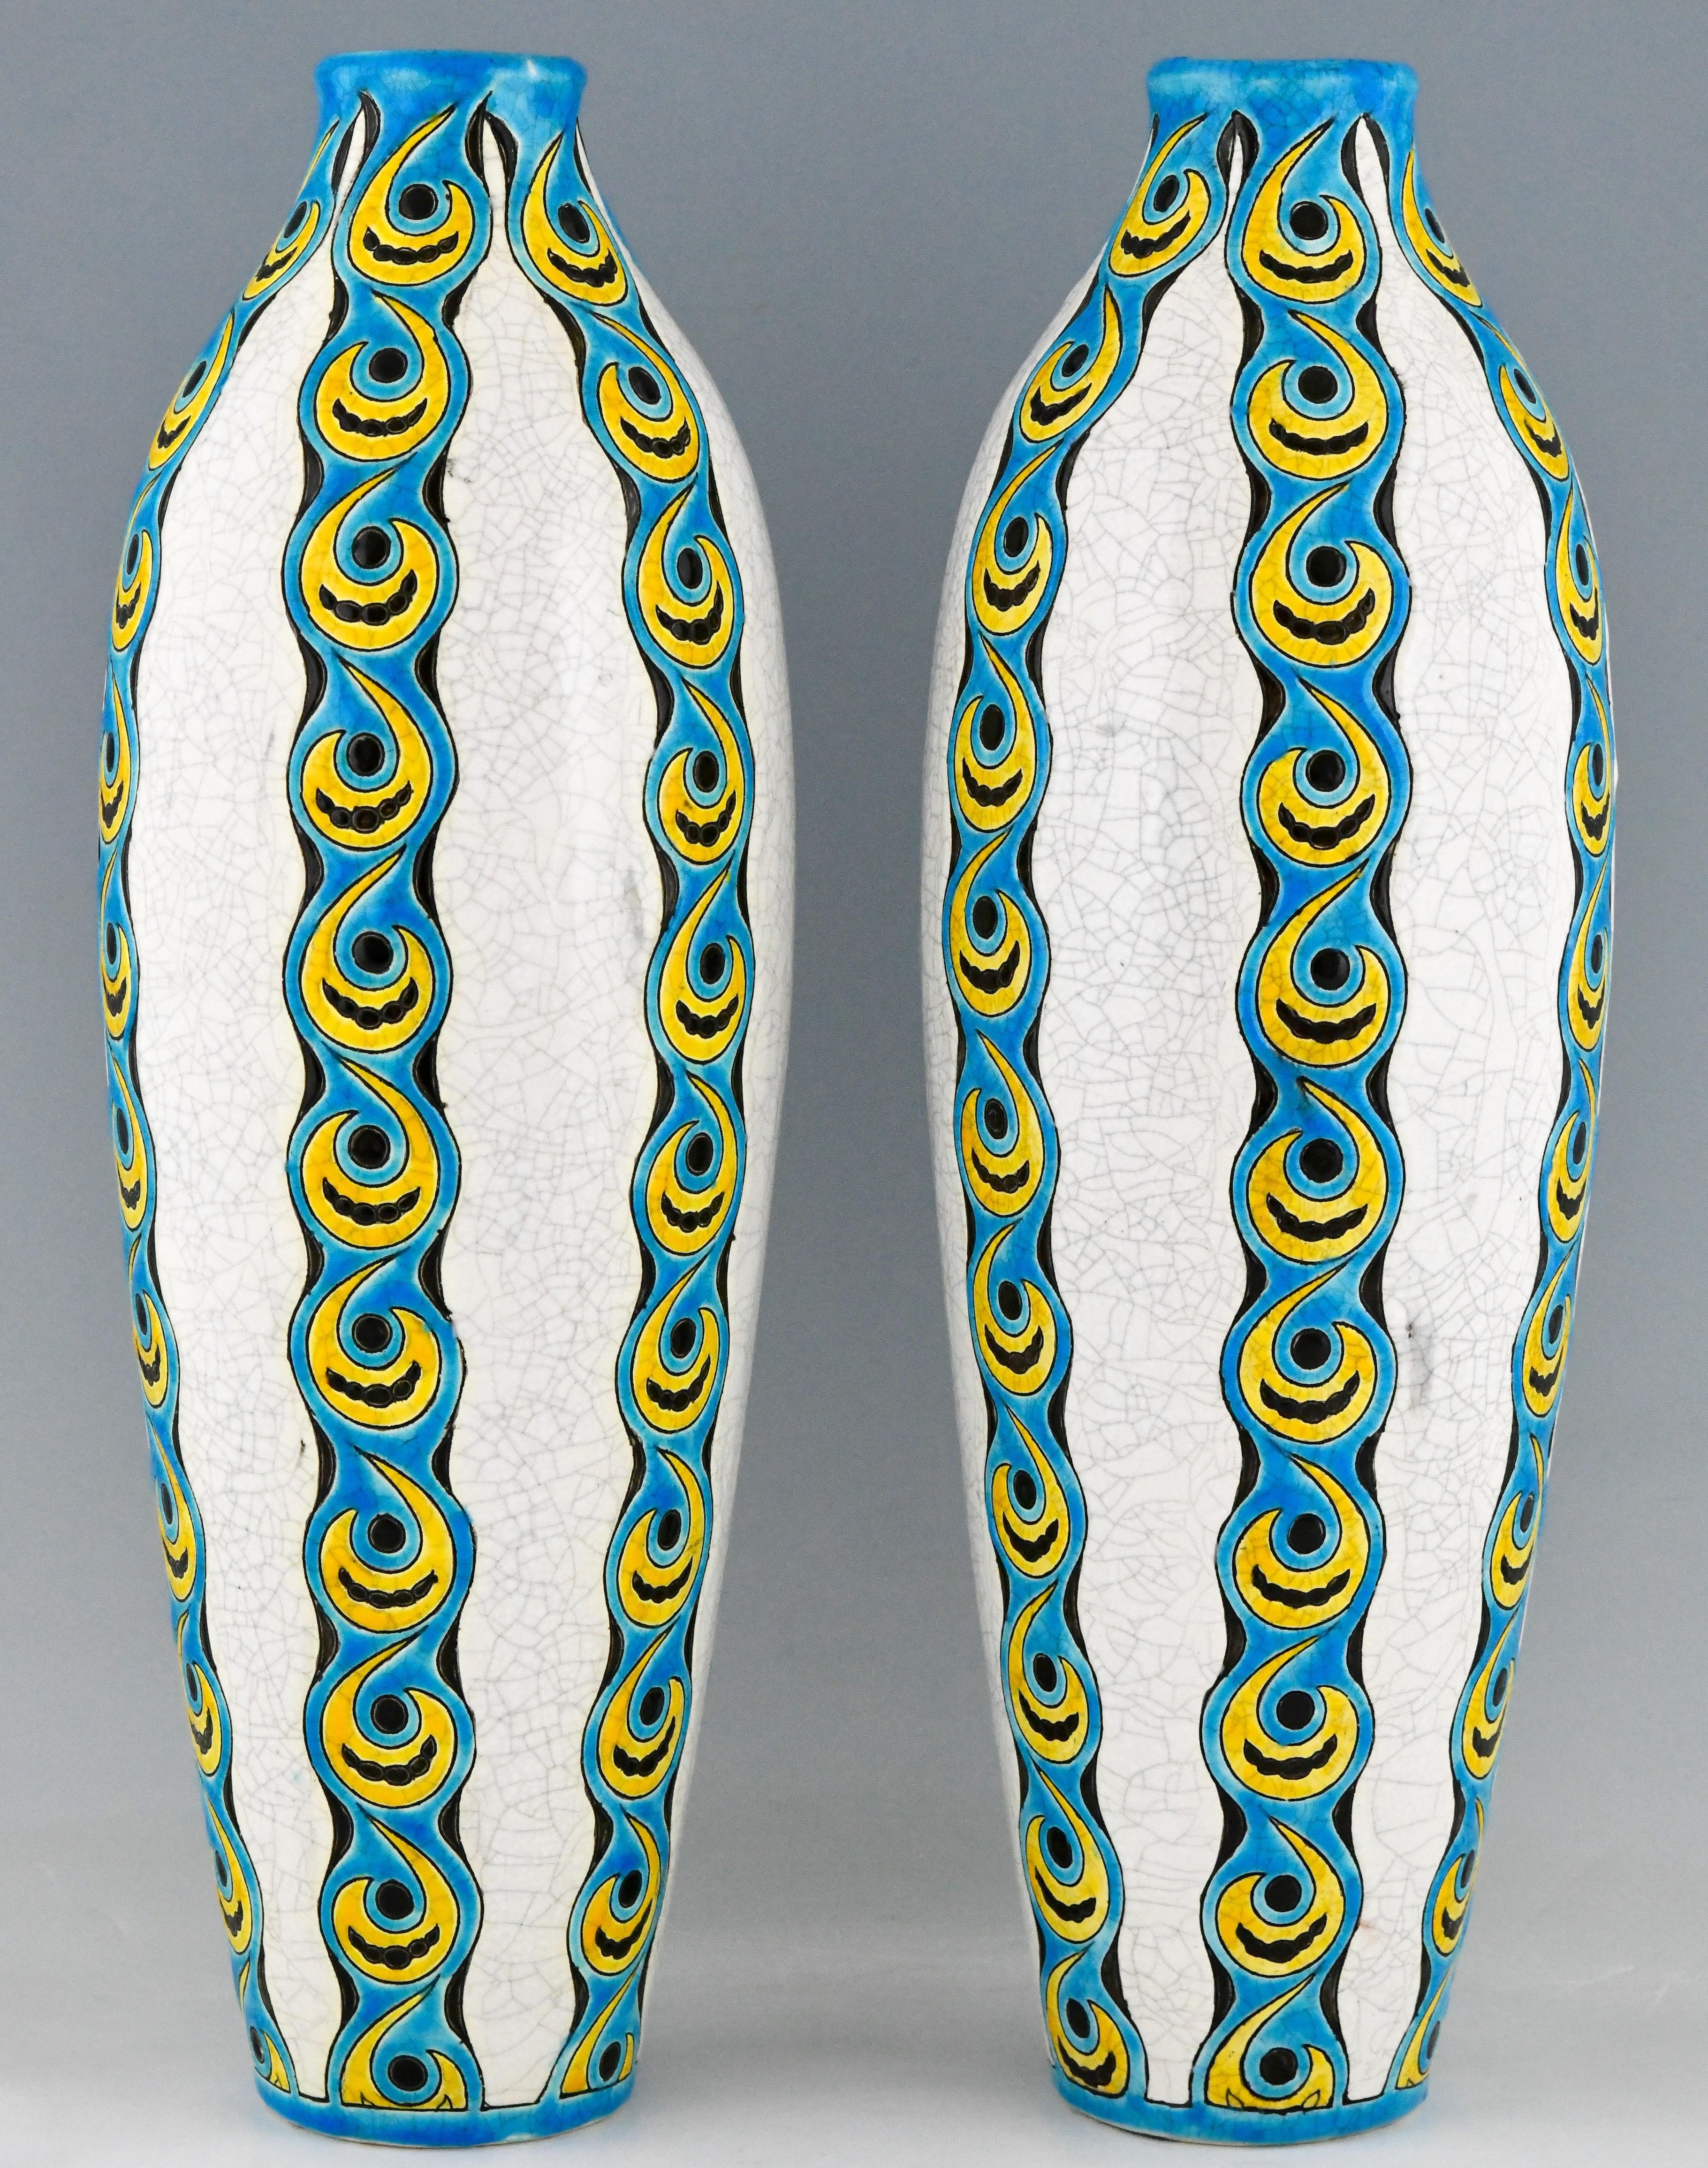 Impressive pair of Art Deco turquoise, yellow, black and white craquel�é vases. Designed by Charles Catteau. Executed by Boch Frères La Louviere, Belgium. Marks: Boch La Louvriere stamp. Ct for Catteau. Numbered D738 for the decor. Dated: